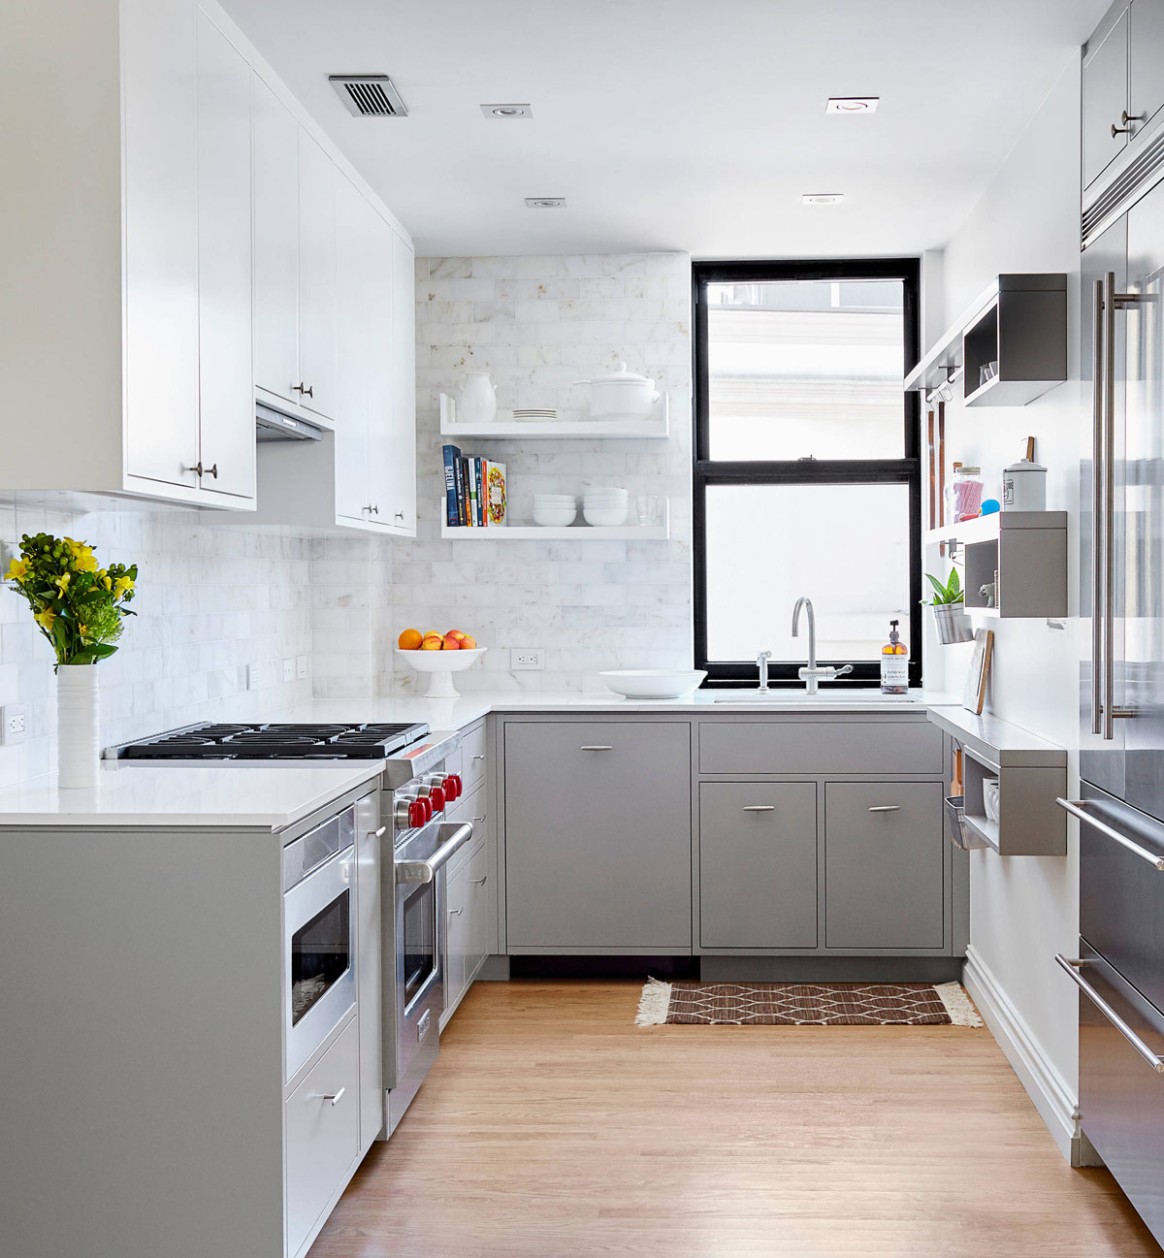 5 Gorgeous Grey and White Kitchens that Get Their Mix Right - grey and white modern kitchen